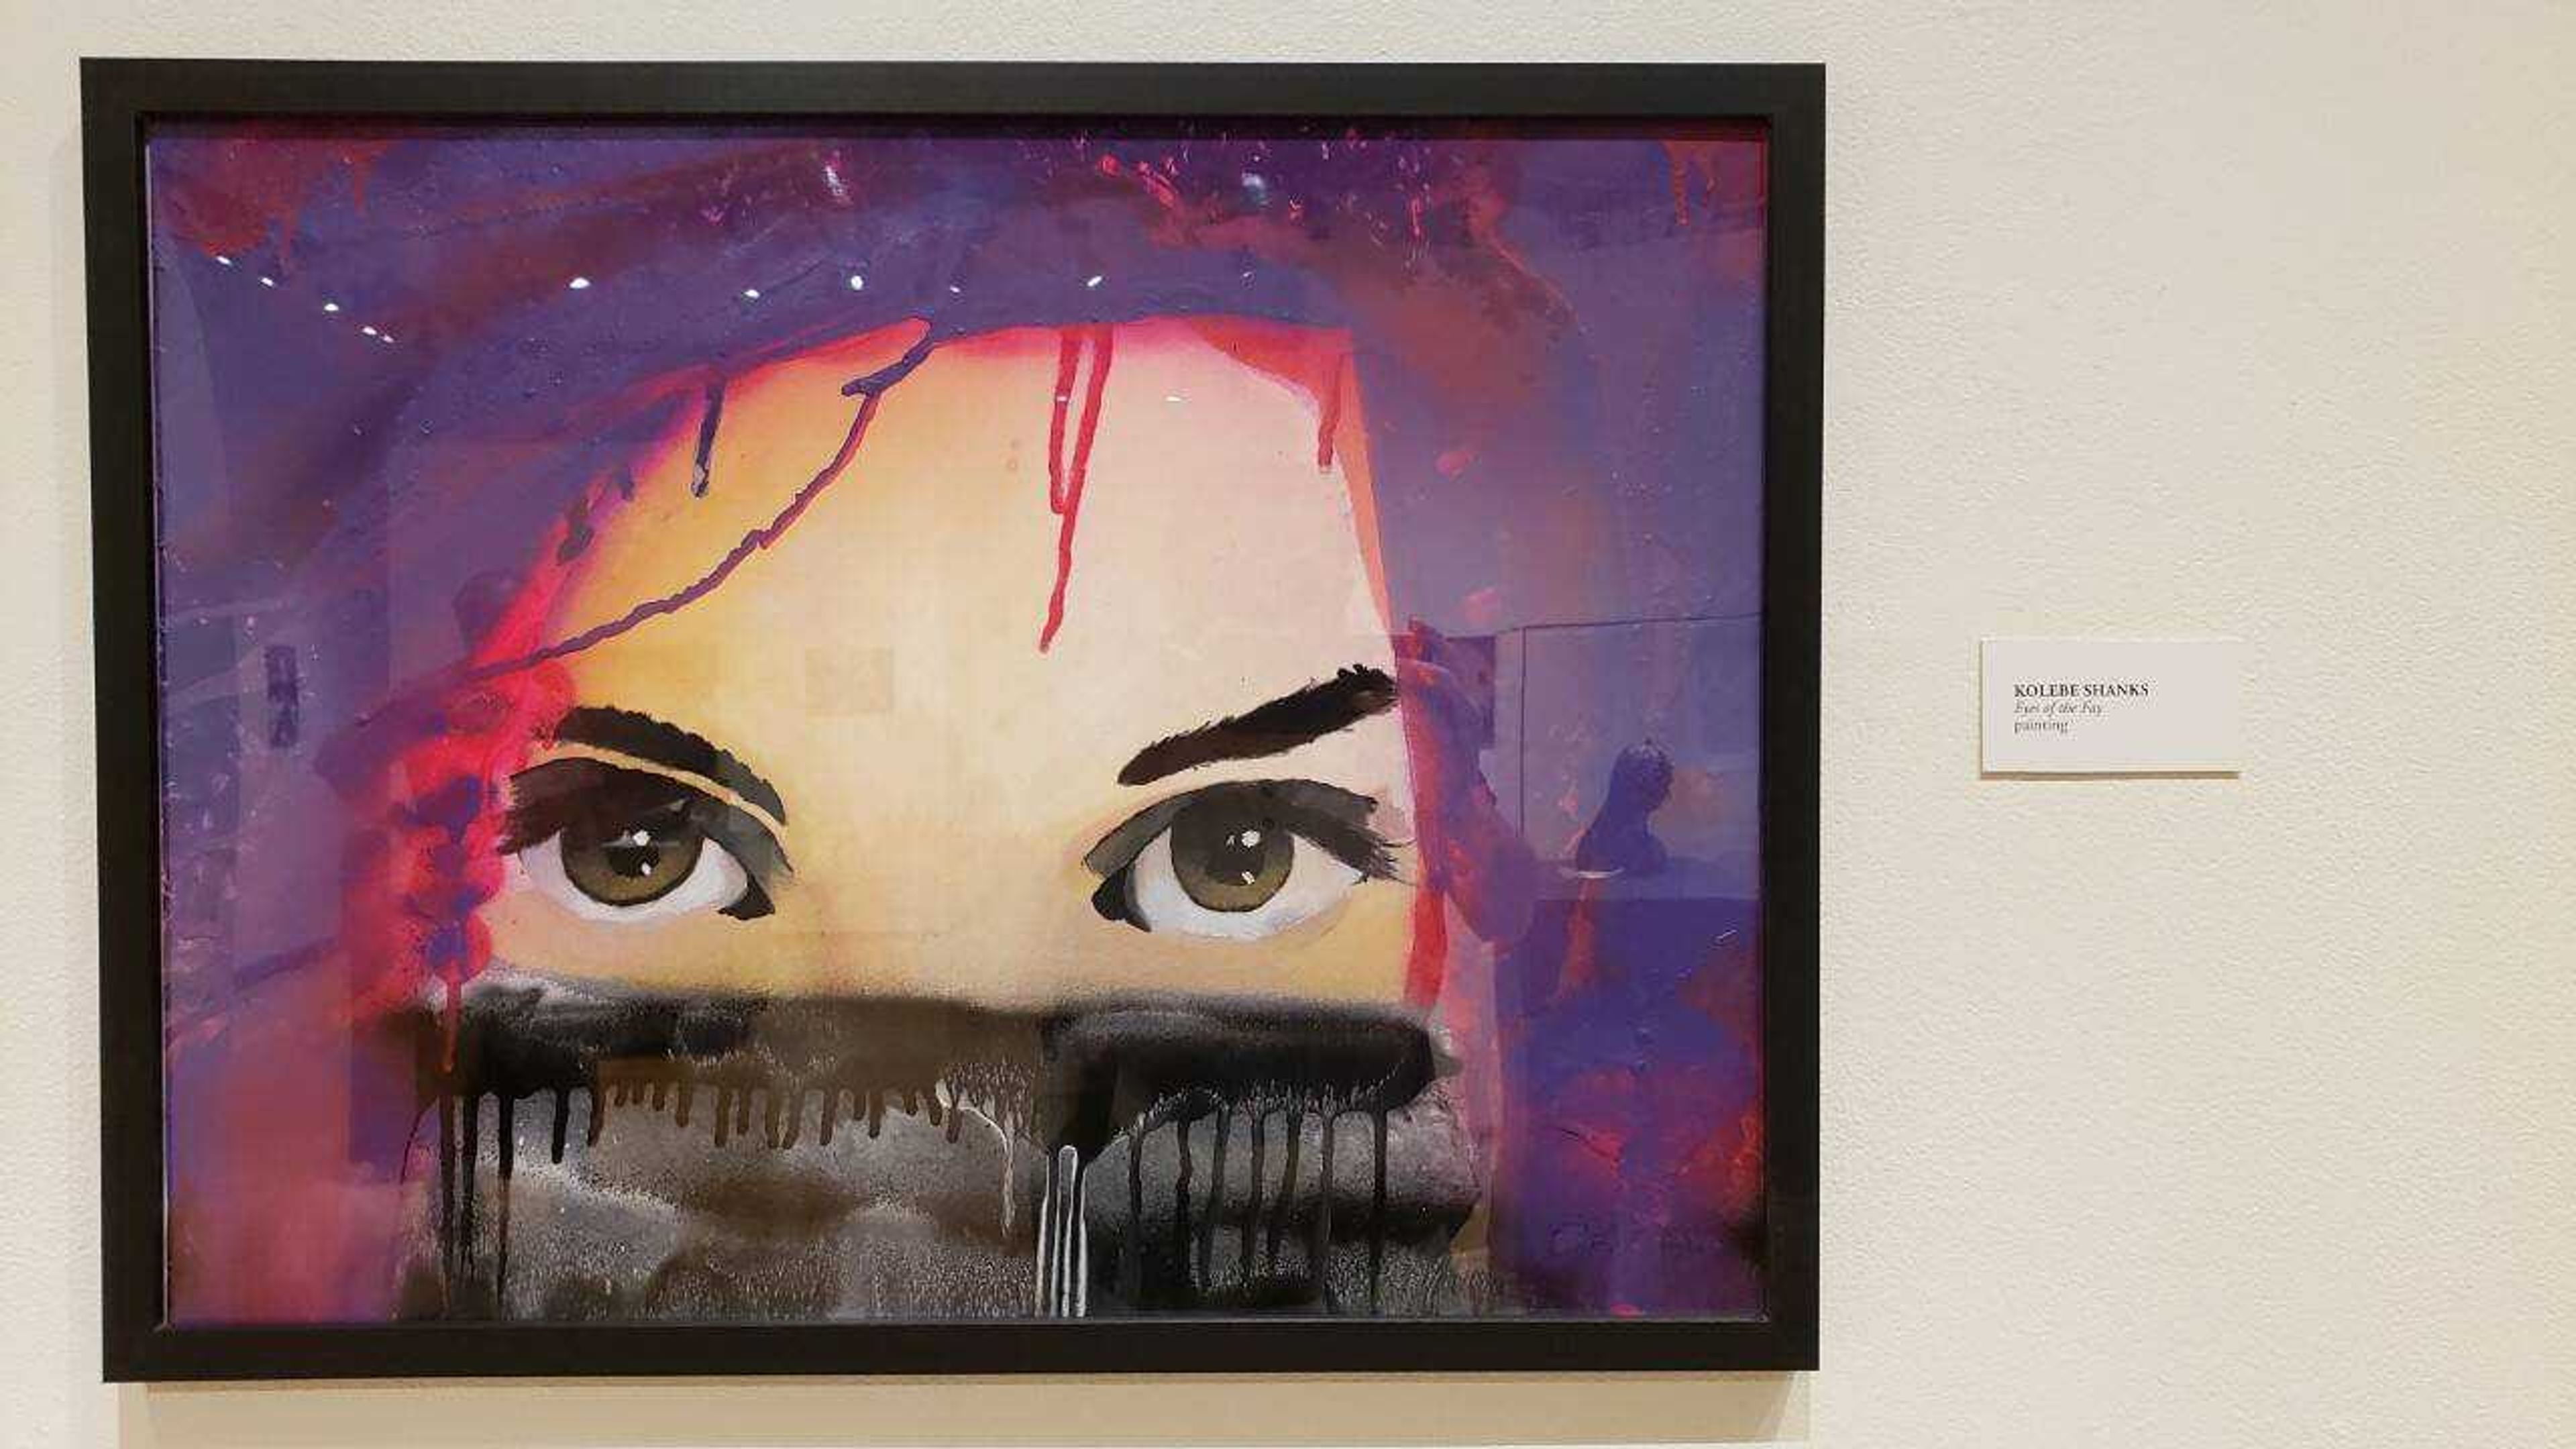 “The Eyes of the Fay” is a portrait created by Kolbe Shanks. Shanks said this piece shows beauty, detritus, sadness and vulnerability. The piece is on display at the Crisp Museum until May 10.